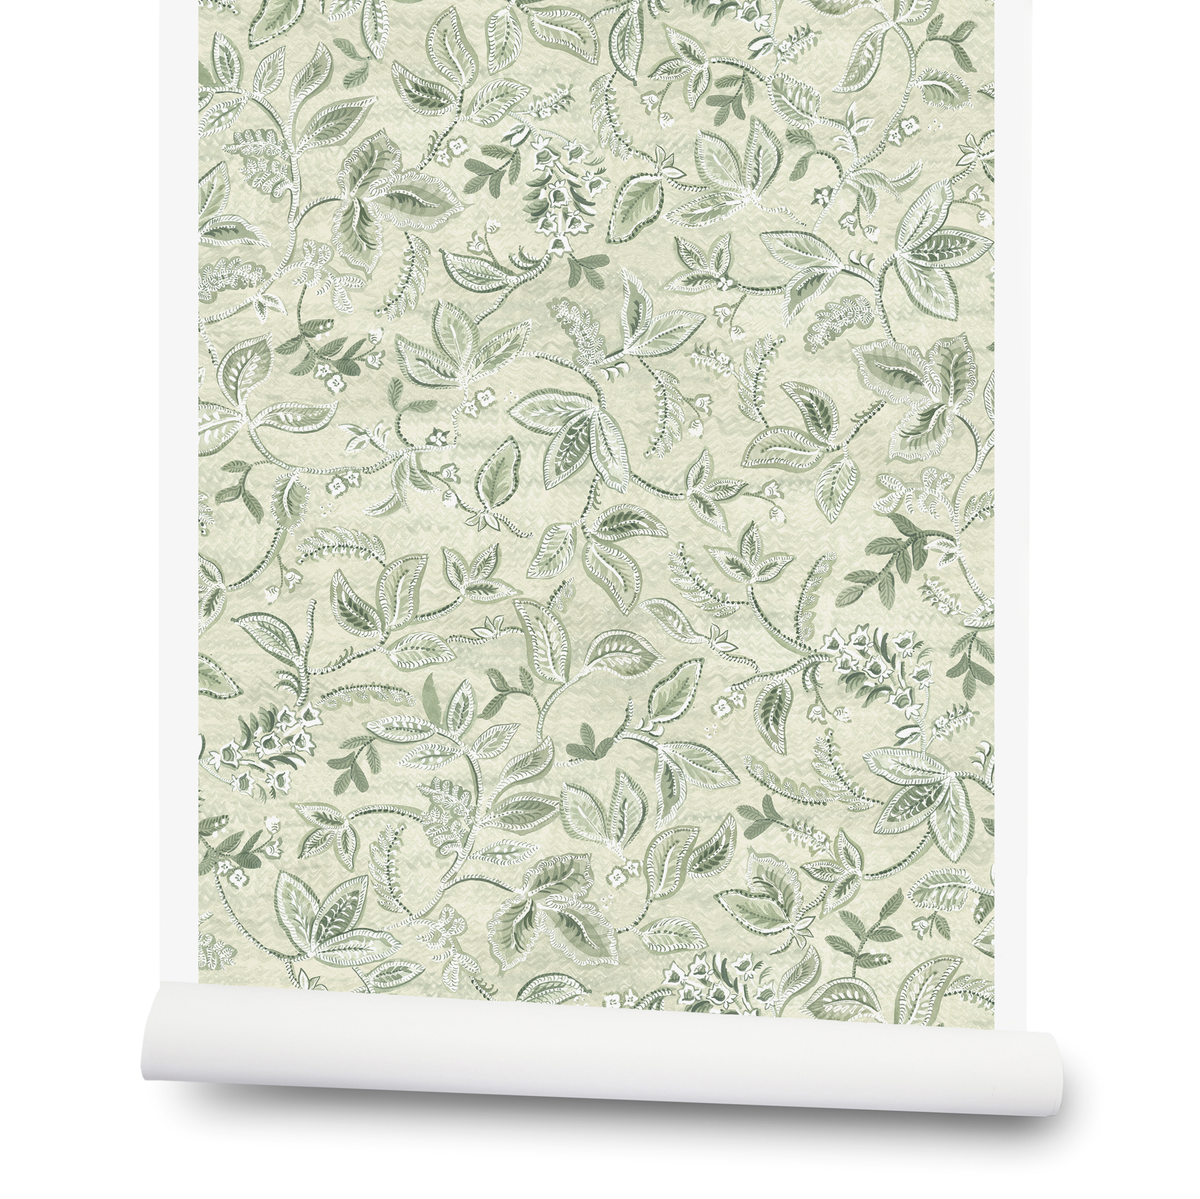 Textured Botanical Wallpaper in Pale Green